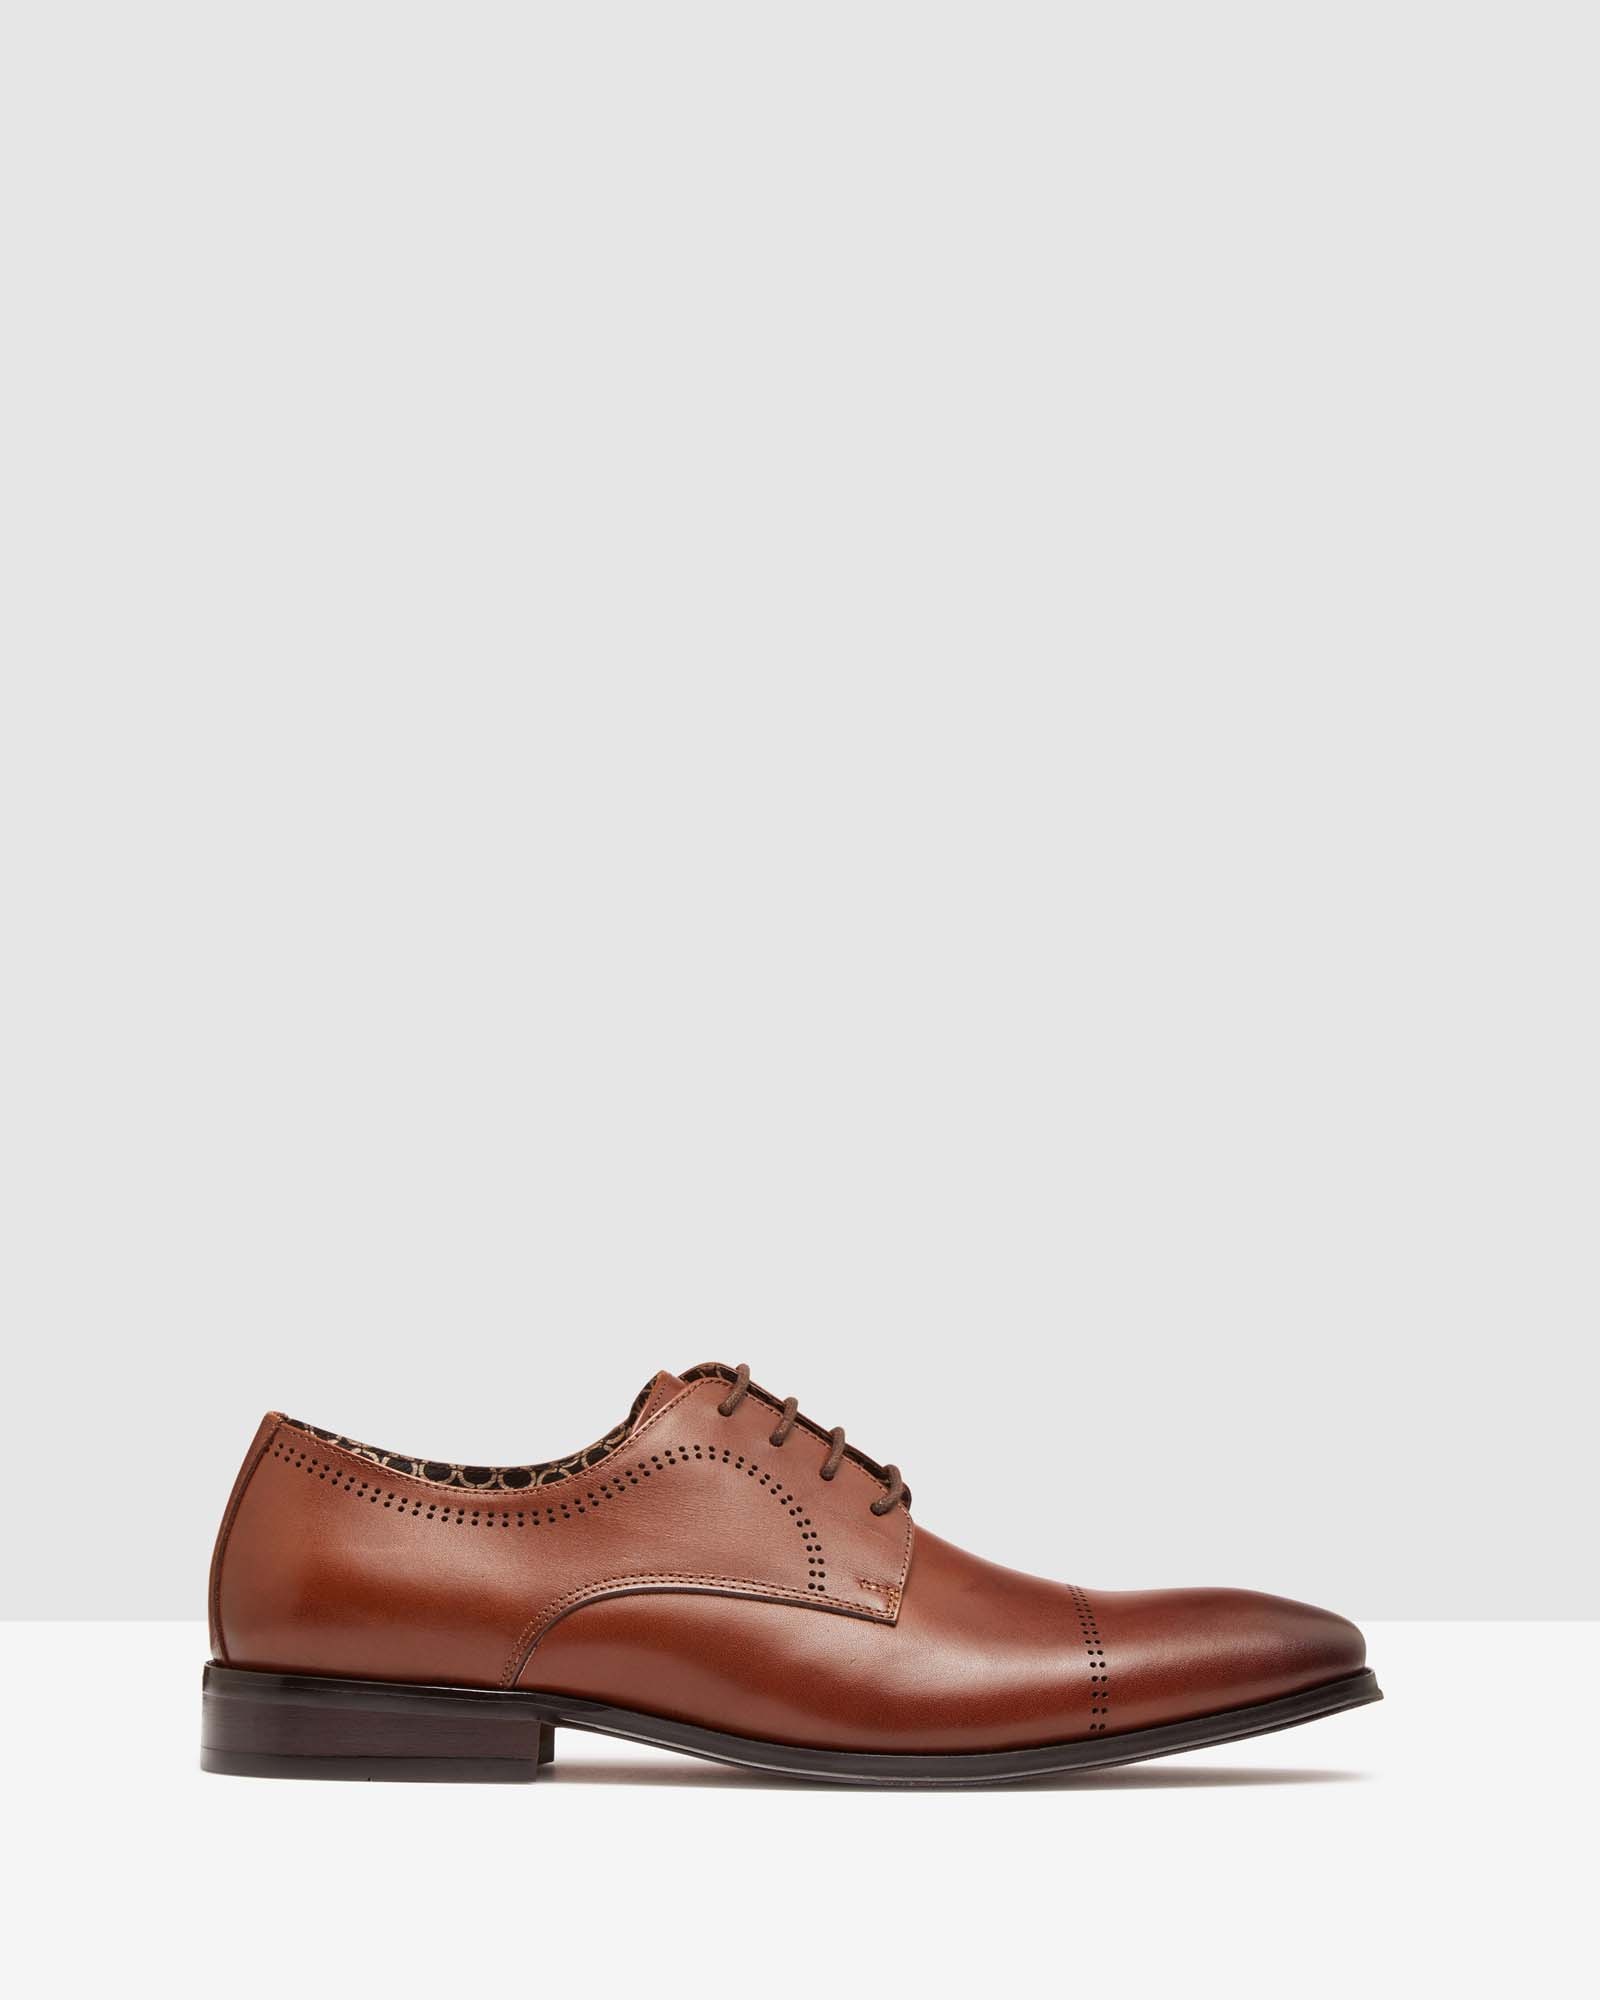 Antonio Darby Punch Hole Shoe Cognac Dip Dye Cow by Oxford | ShoeSales